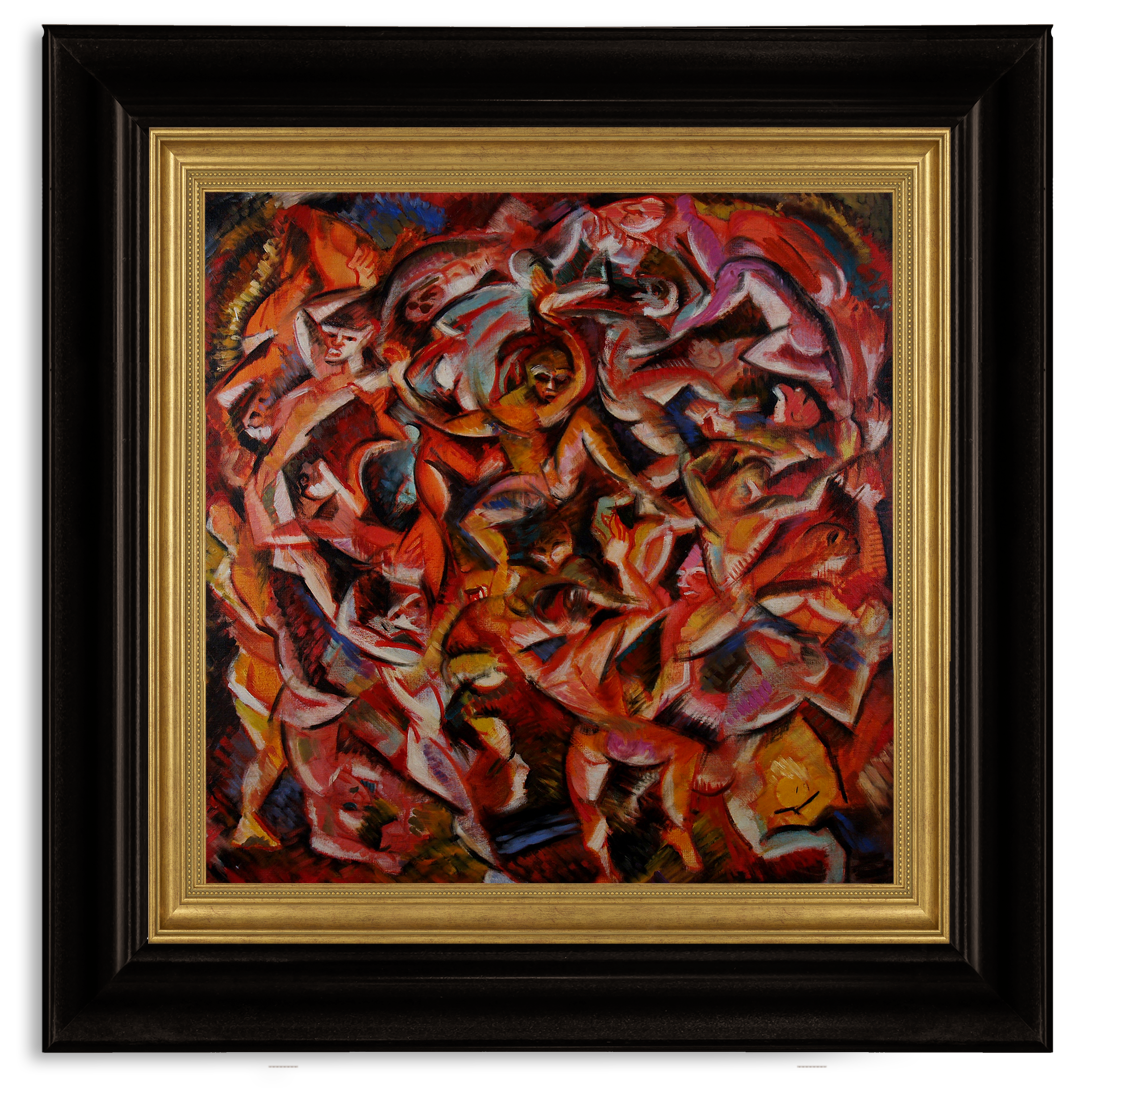 Shop abstract oil paintings by American Artist, John Varriano